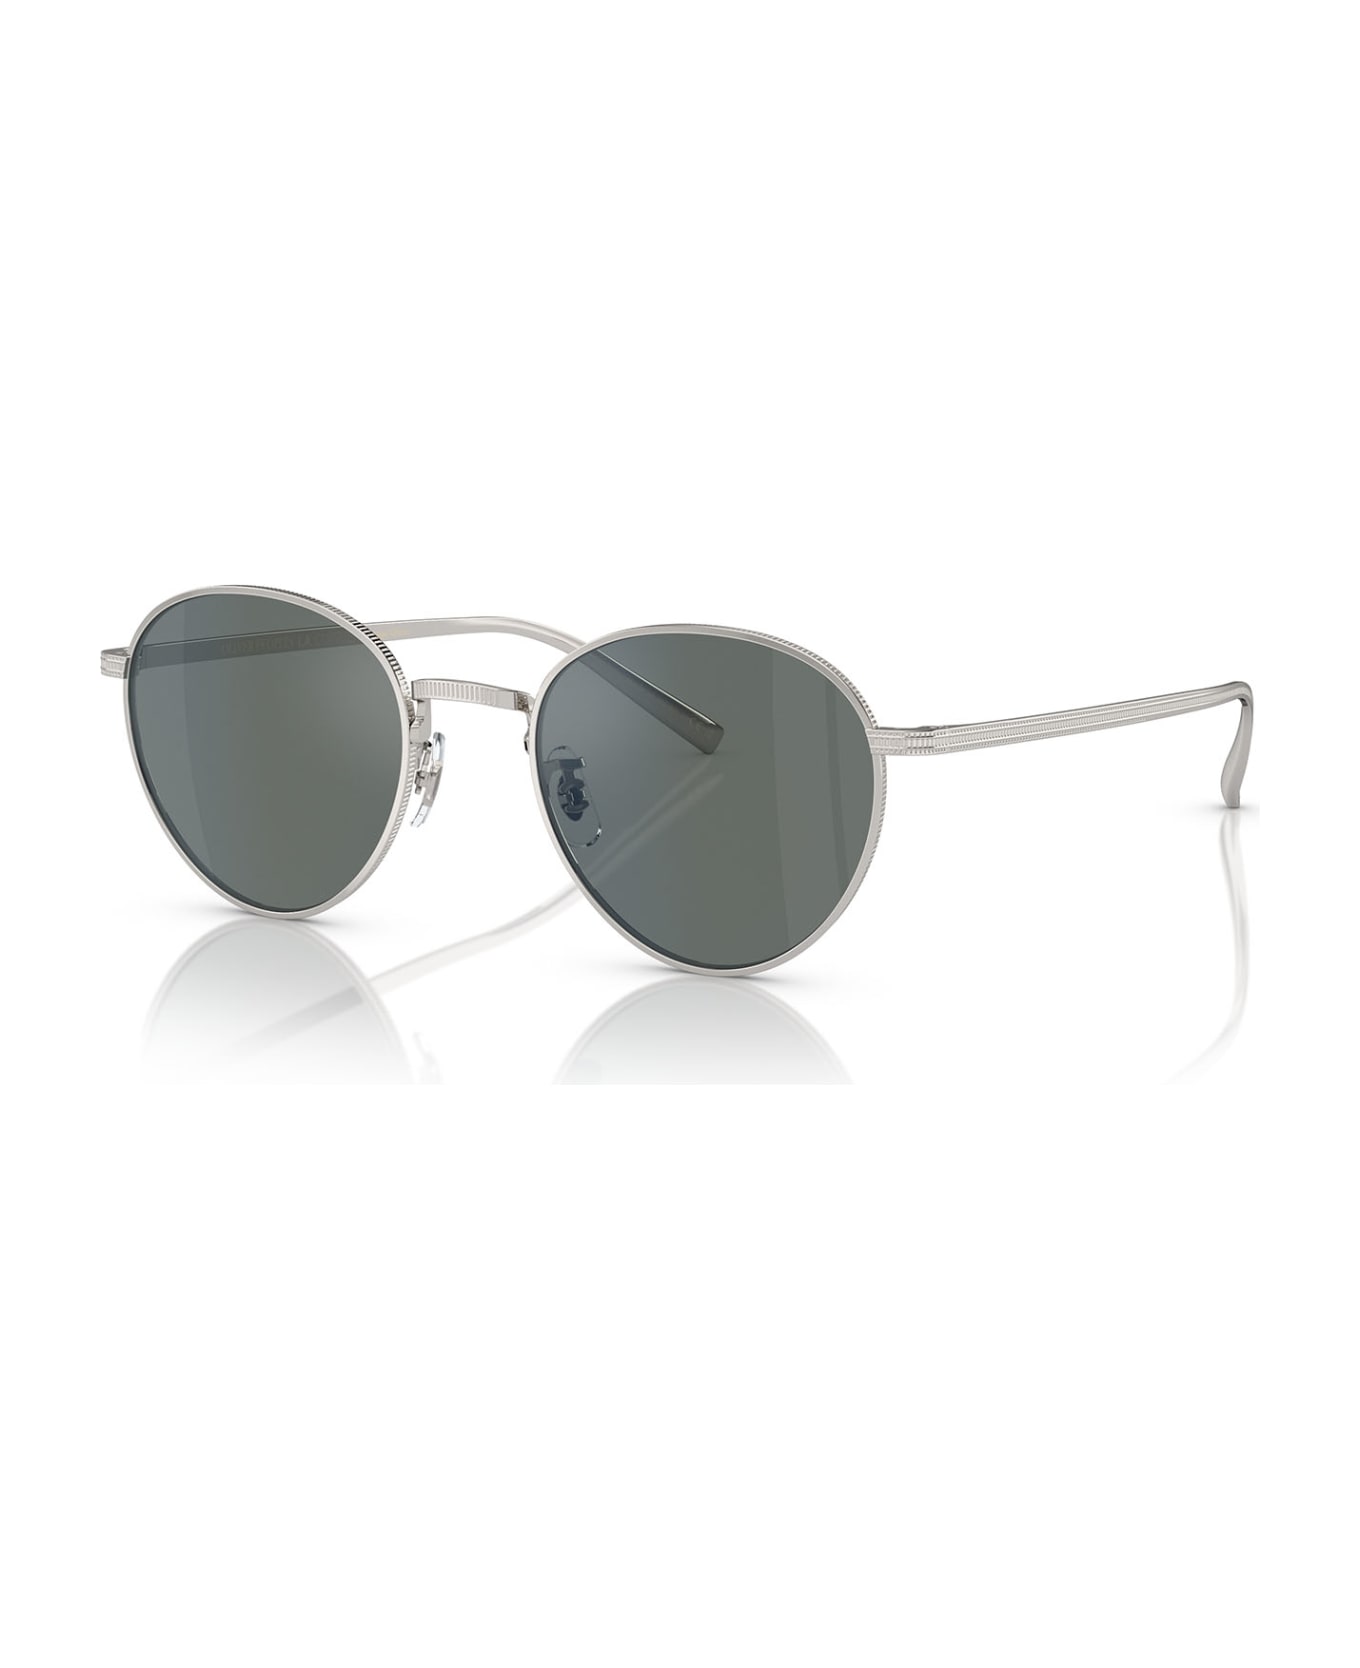 Oliver Peoples Ov1336st Silver Sunglasses - Silver